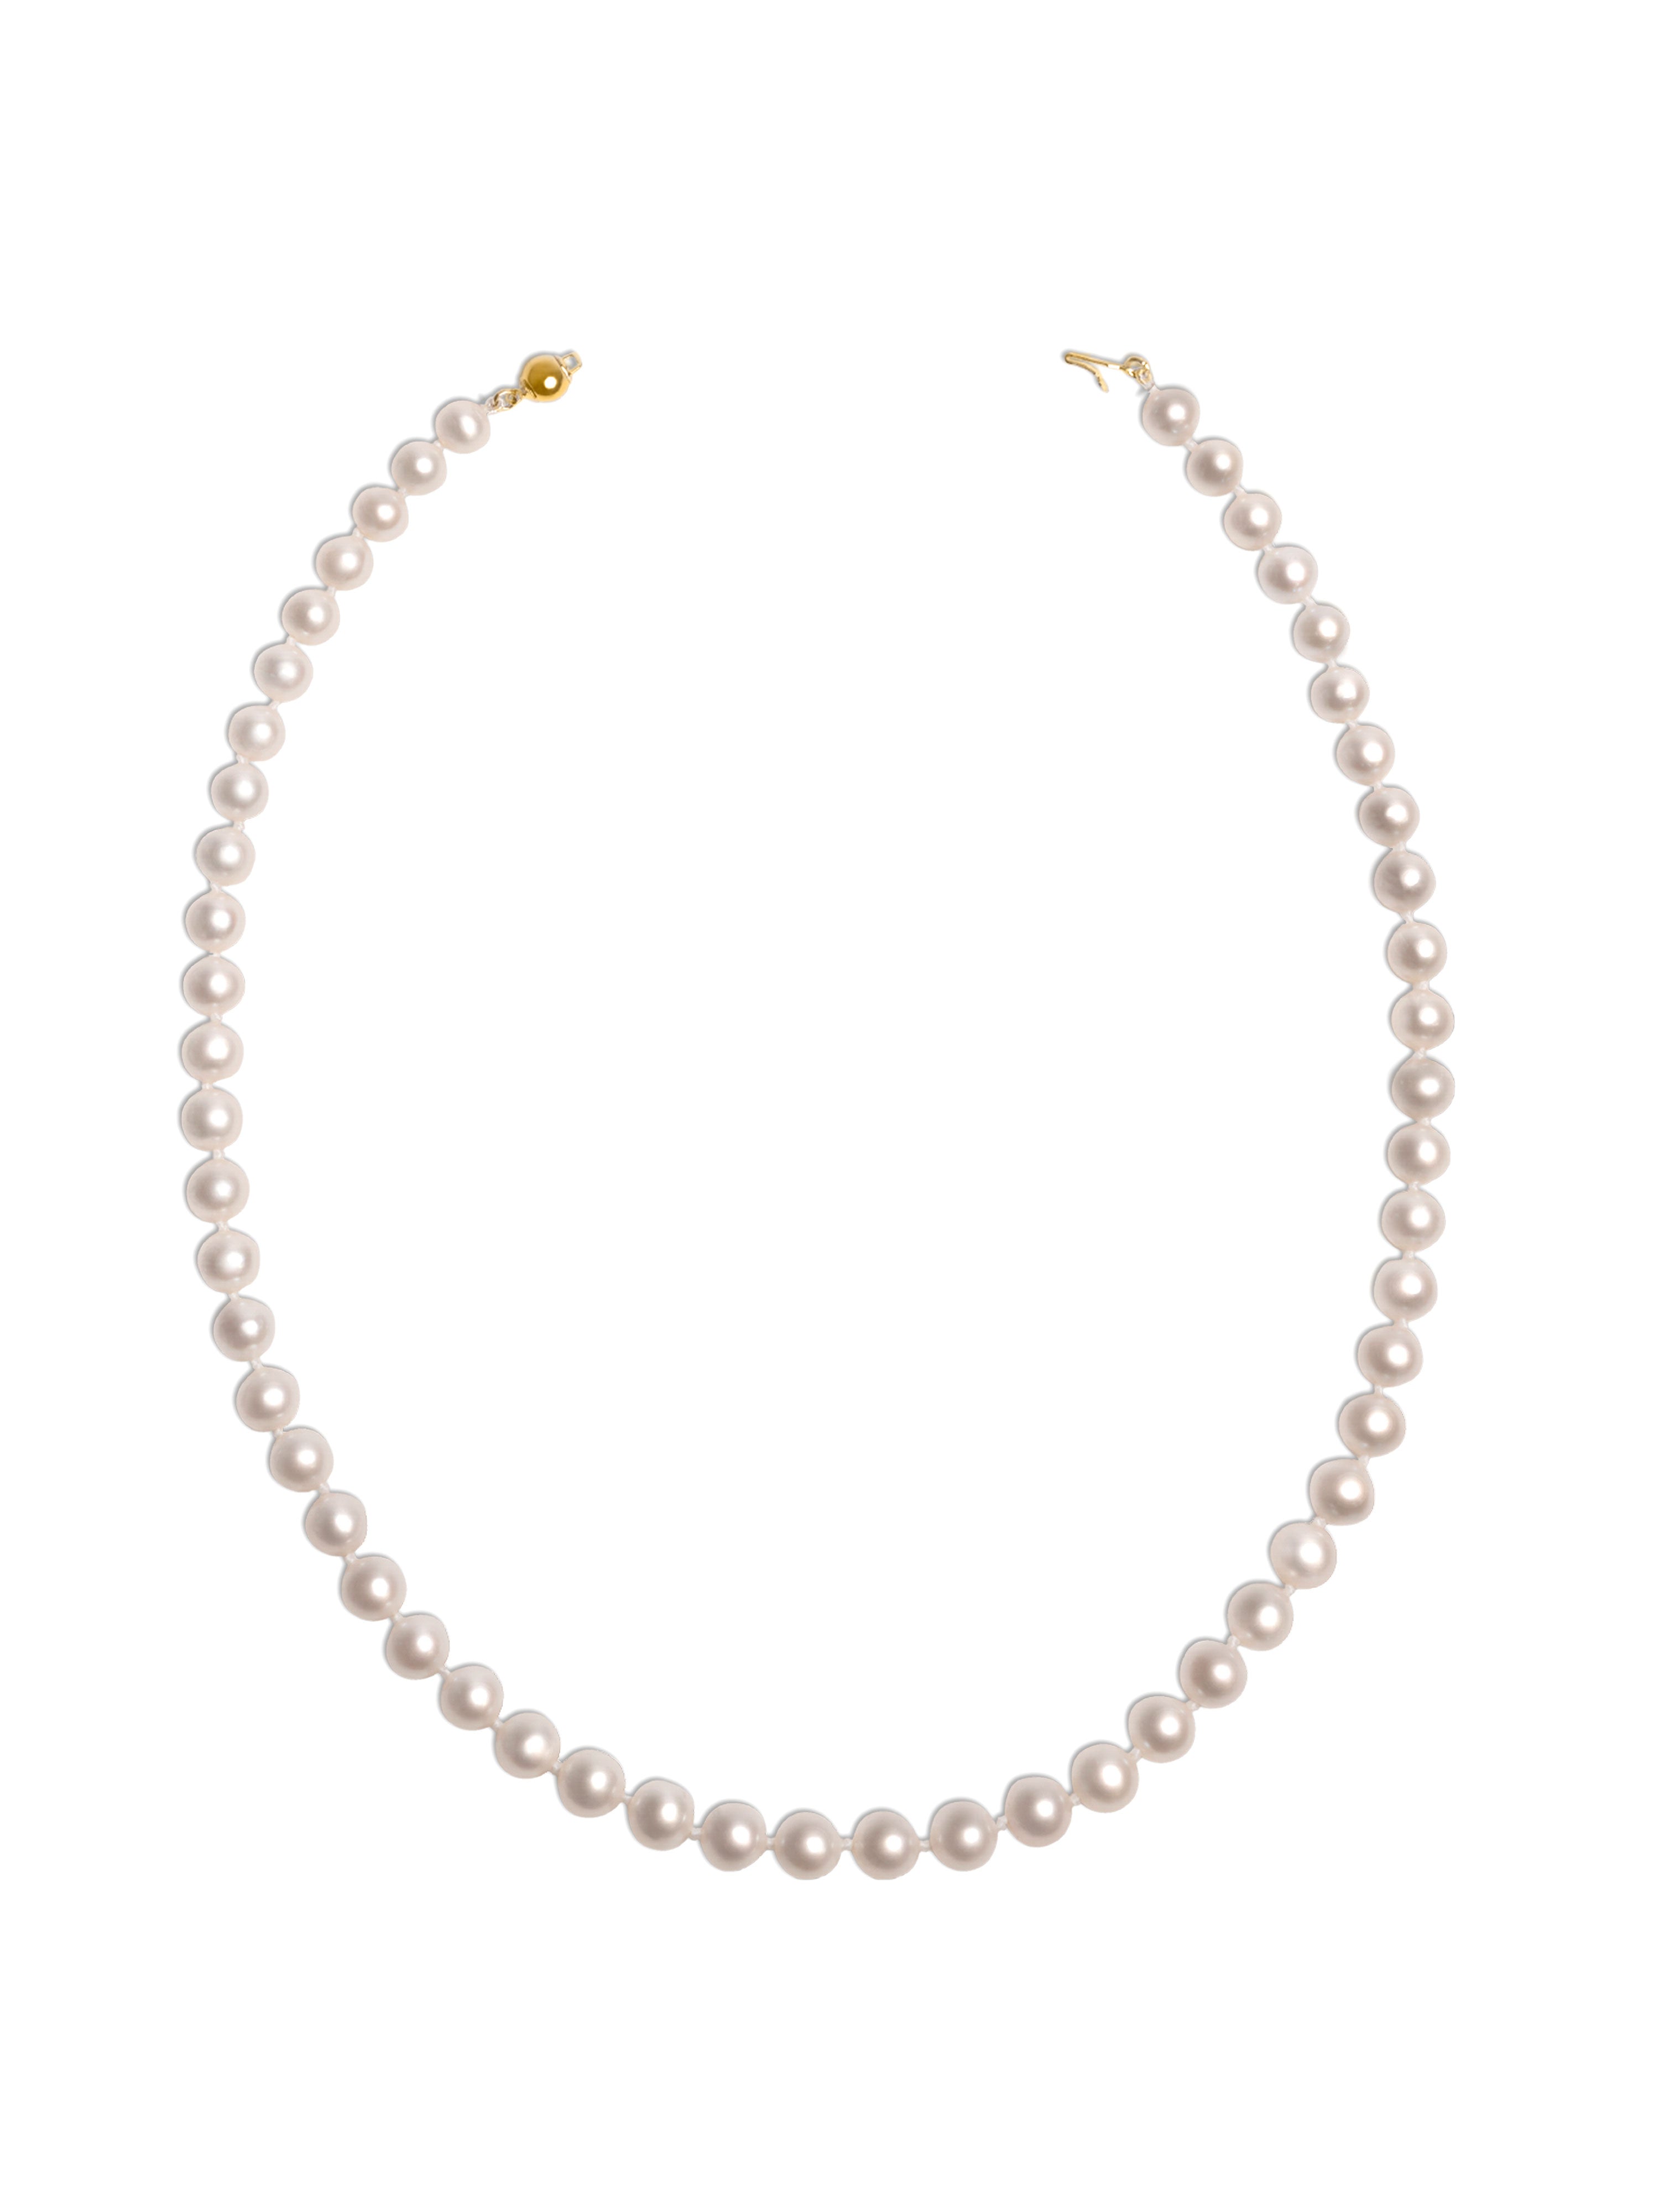 6.5-7.5mm AAA Freshwater Cultured Pearl Necklace, 90cm Long | 18K Gold